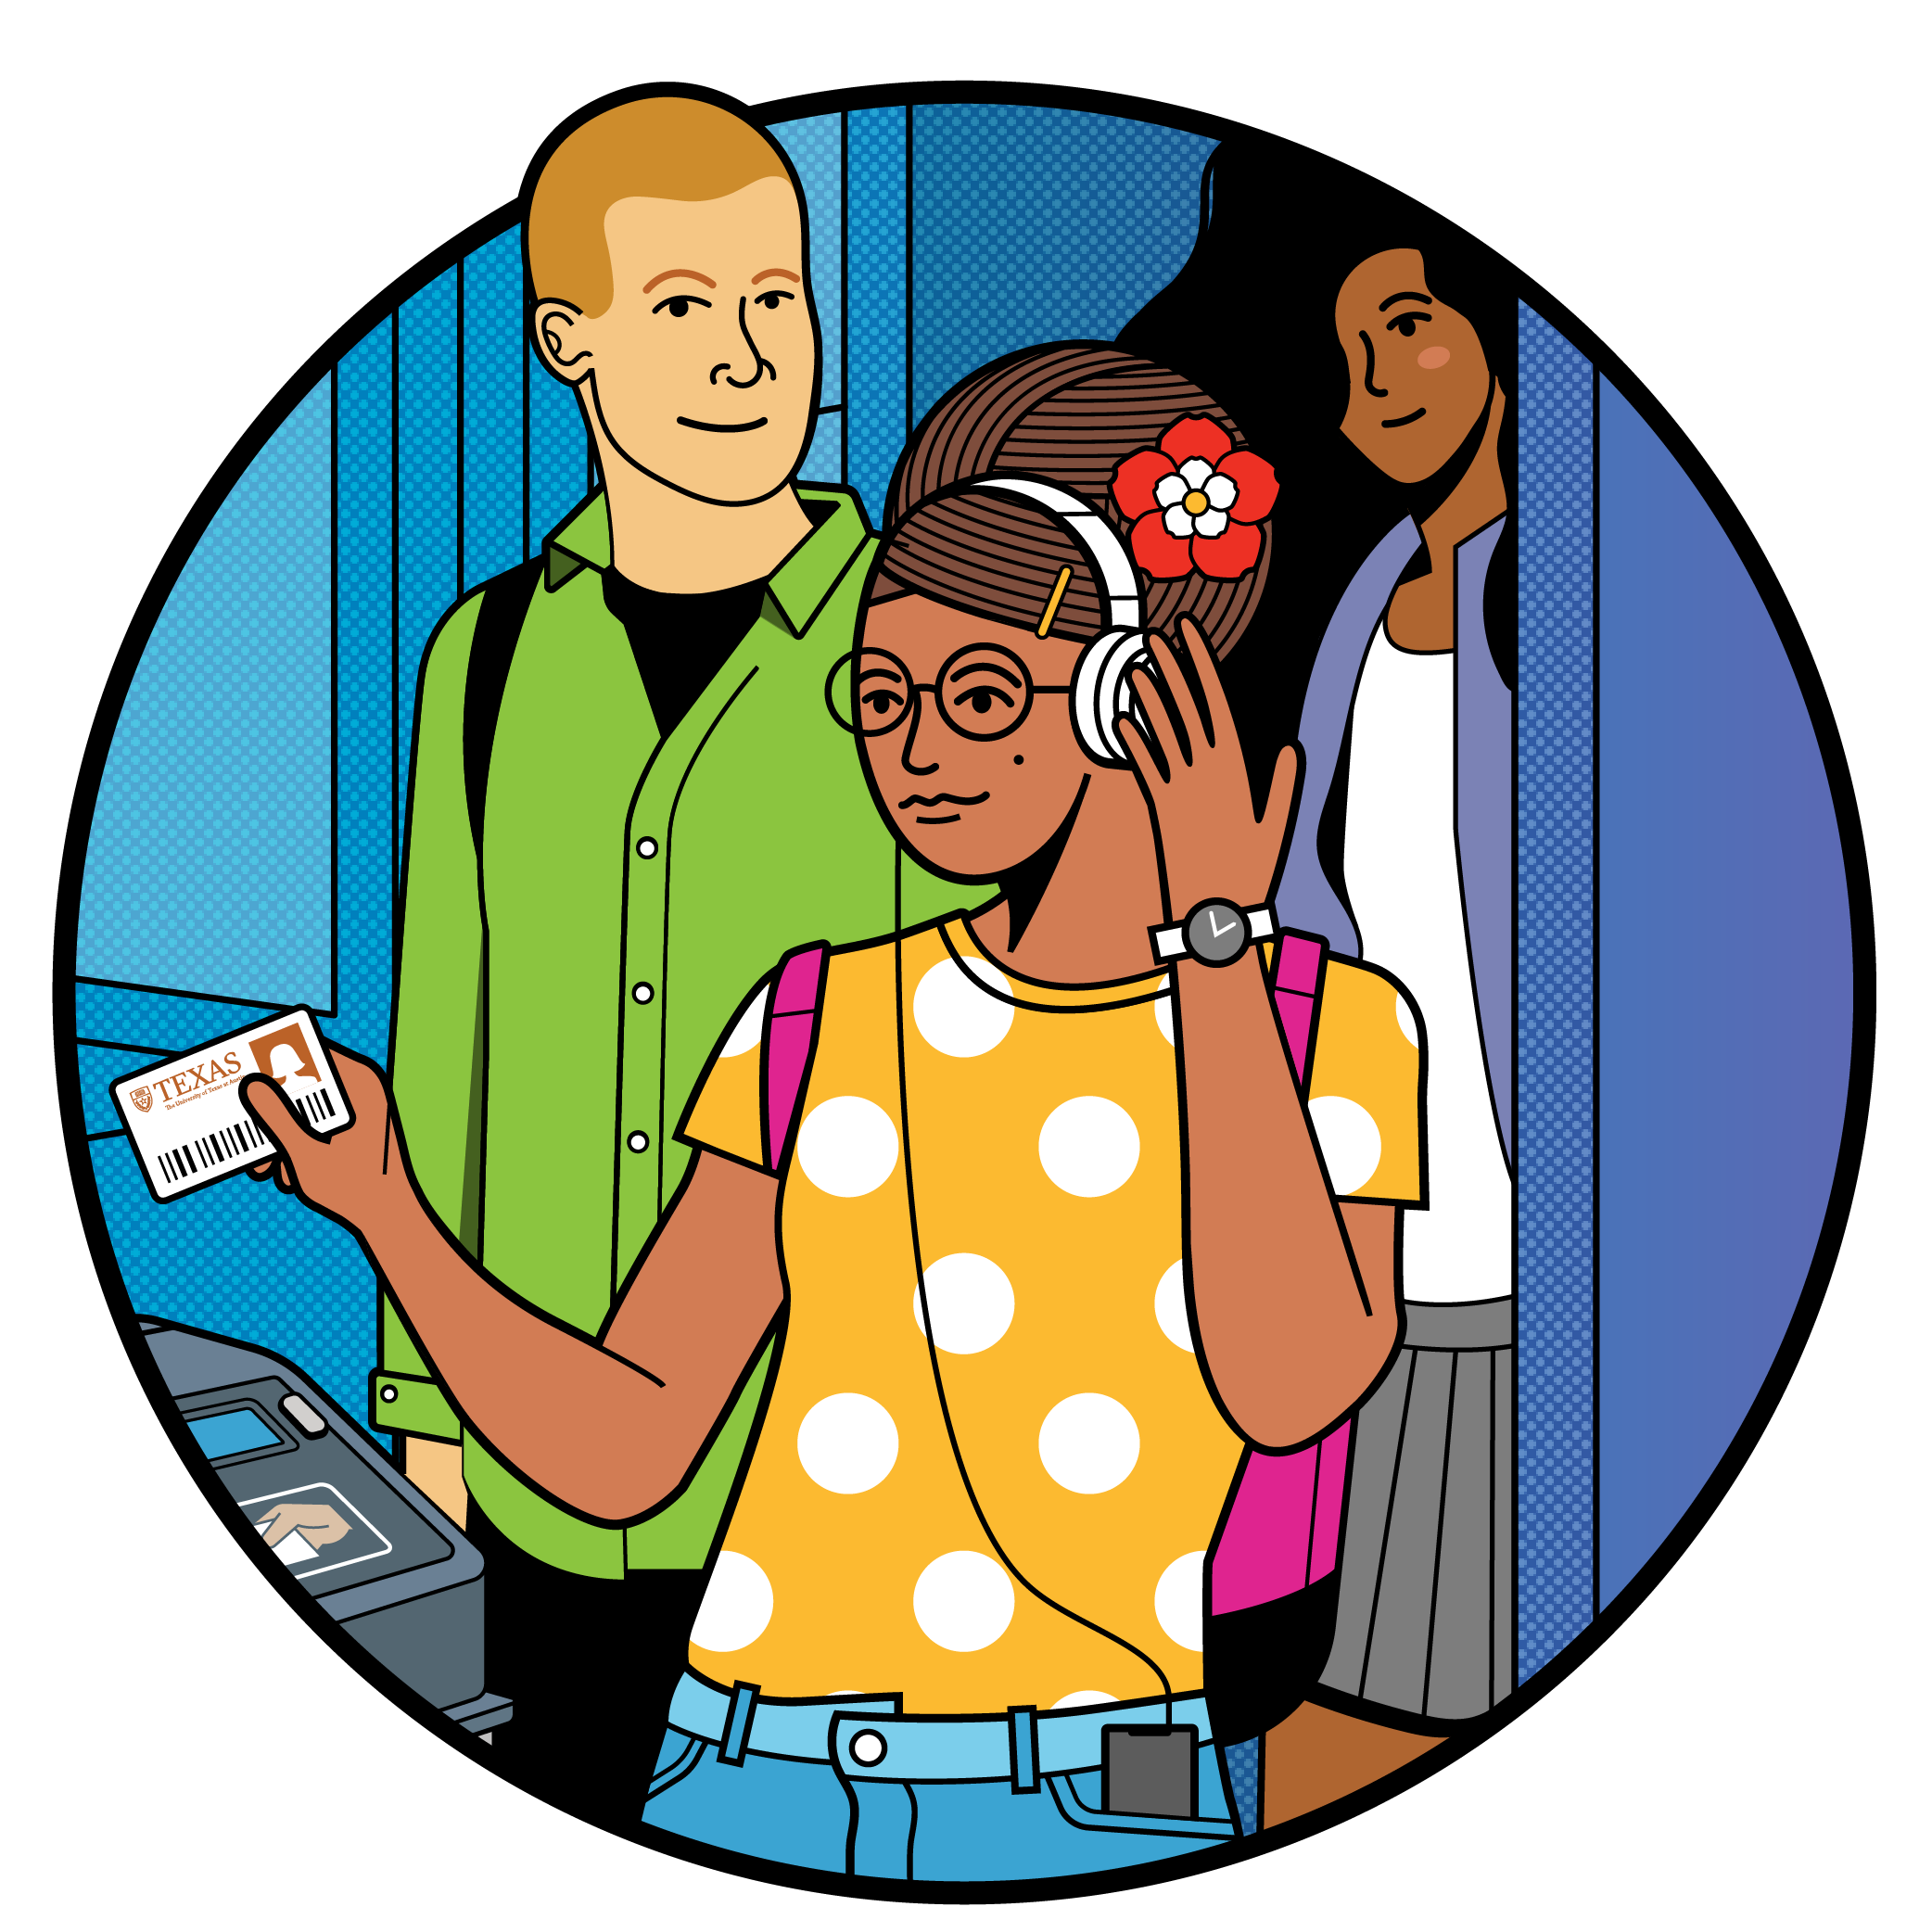 An illustration of a student listening to music while boarding a bus